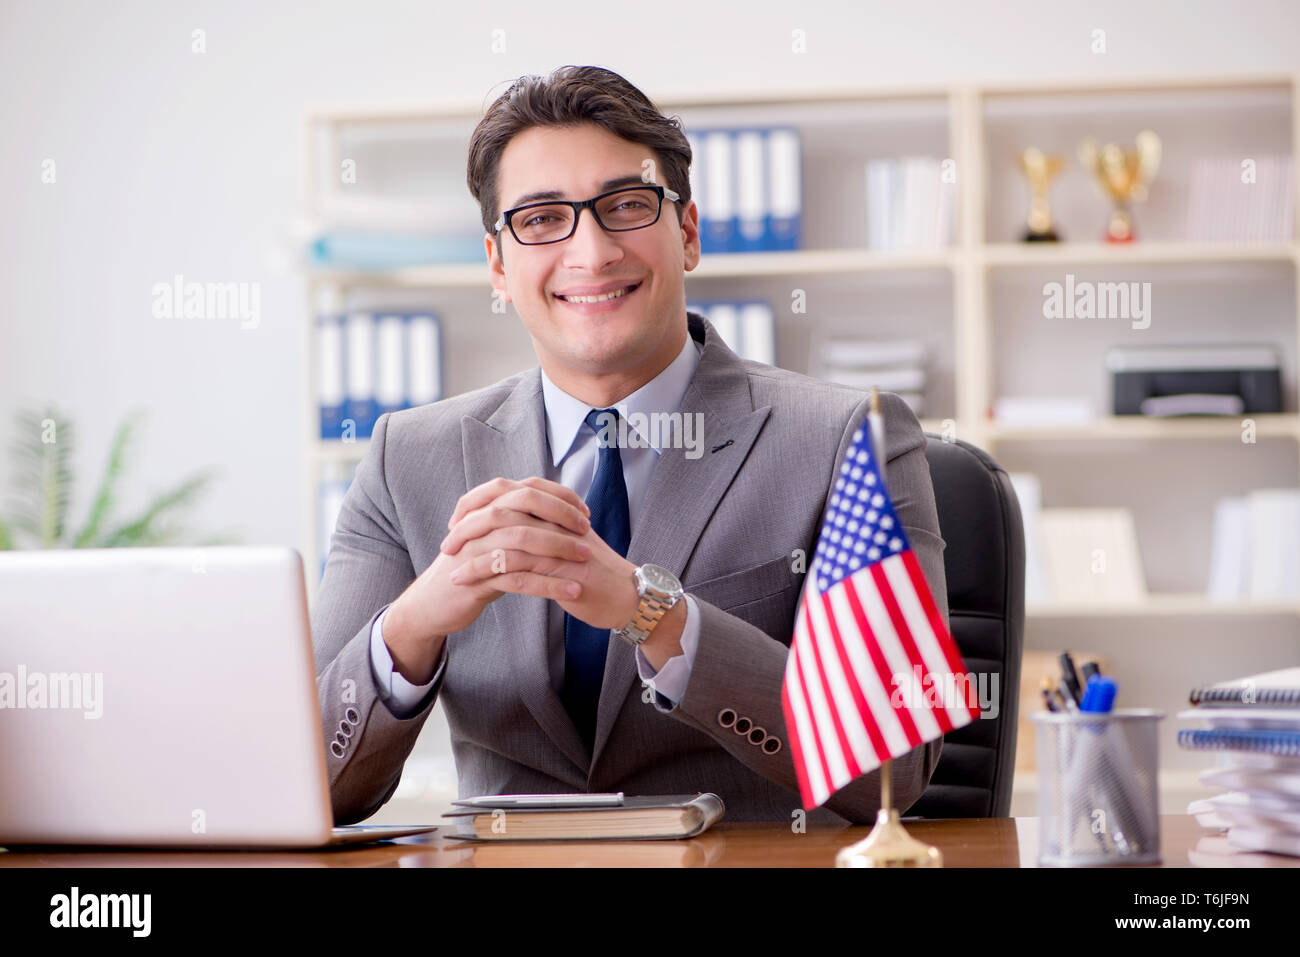 Businessman with American flag in office Banque D'Images